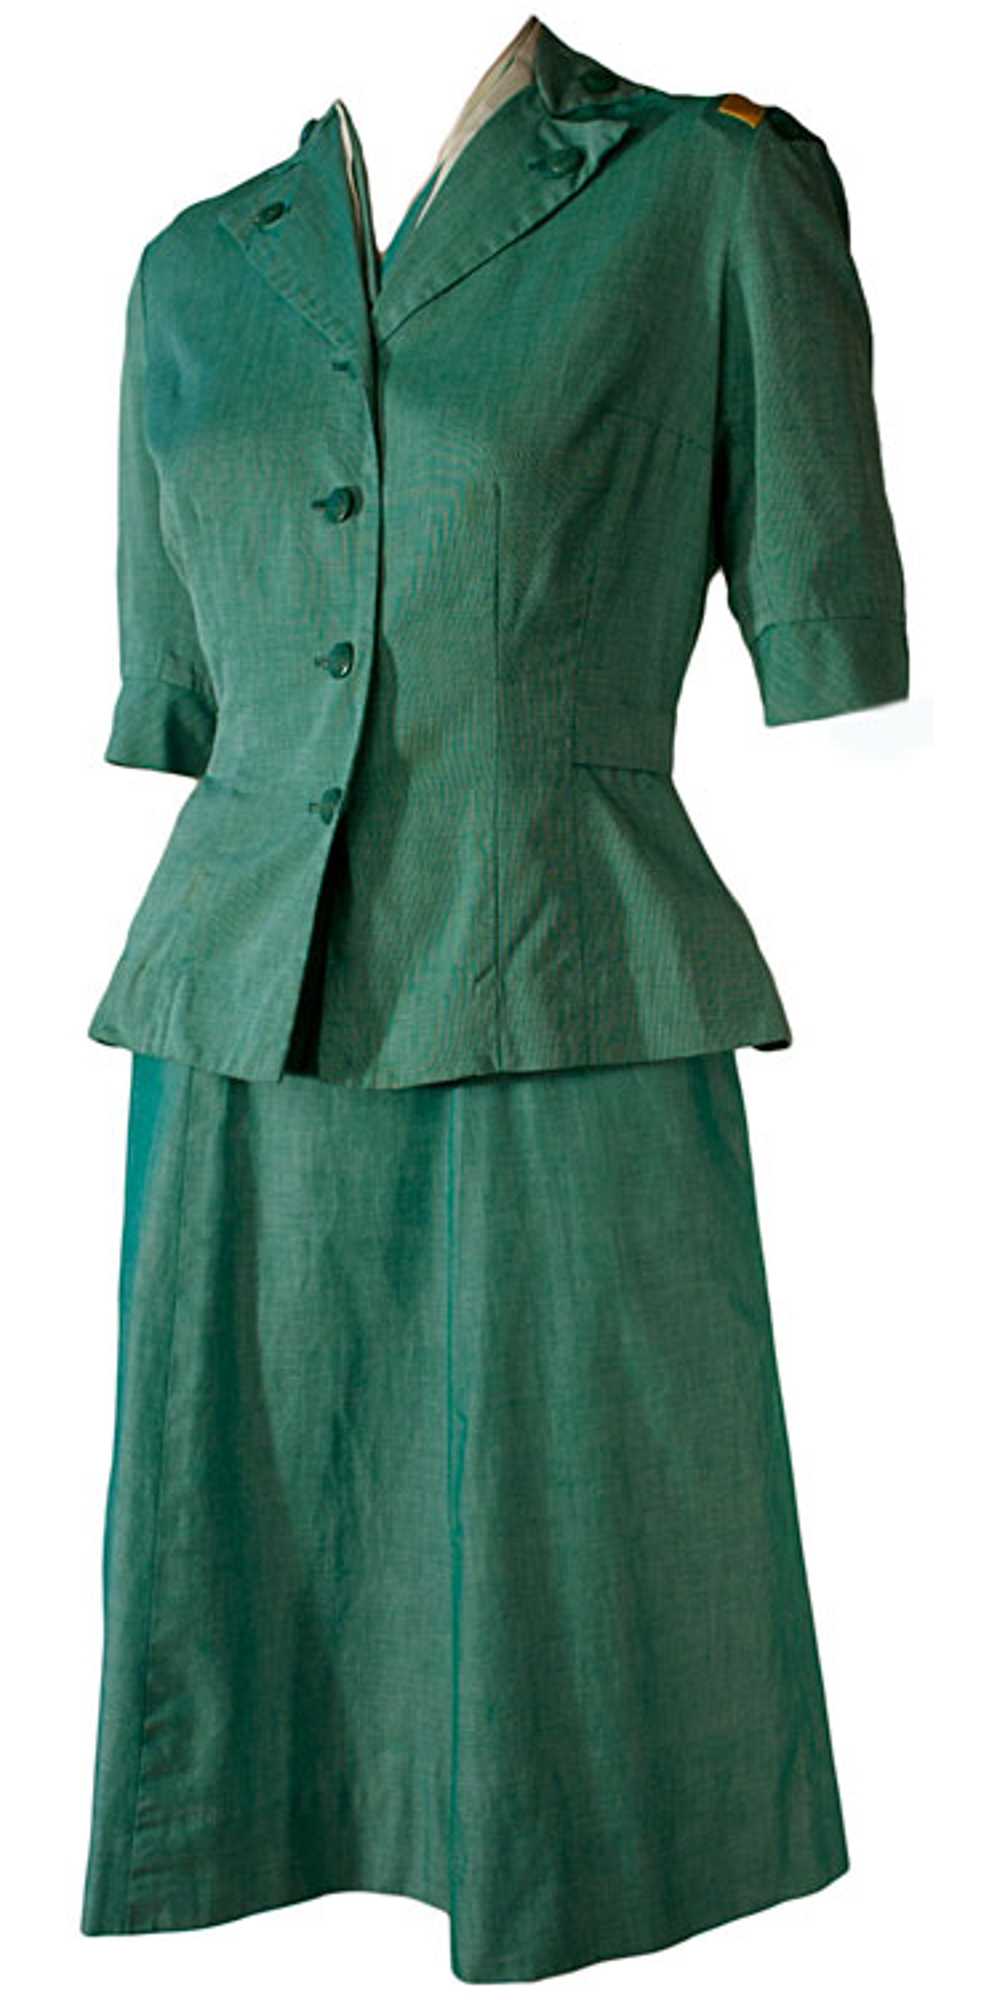 1950s Girl Scout Uniform Dress and Jacket - image 1